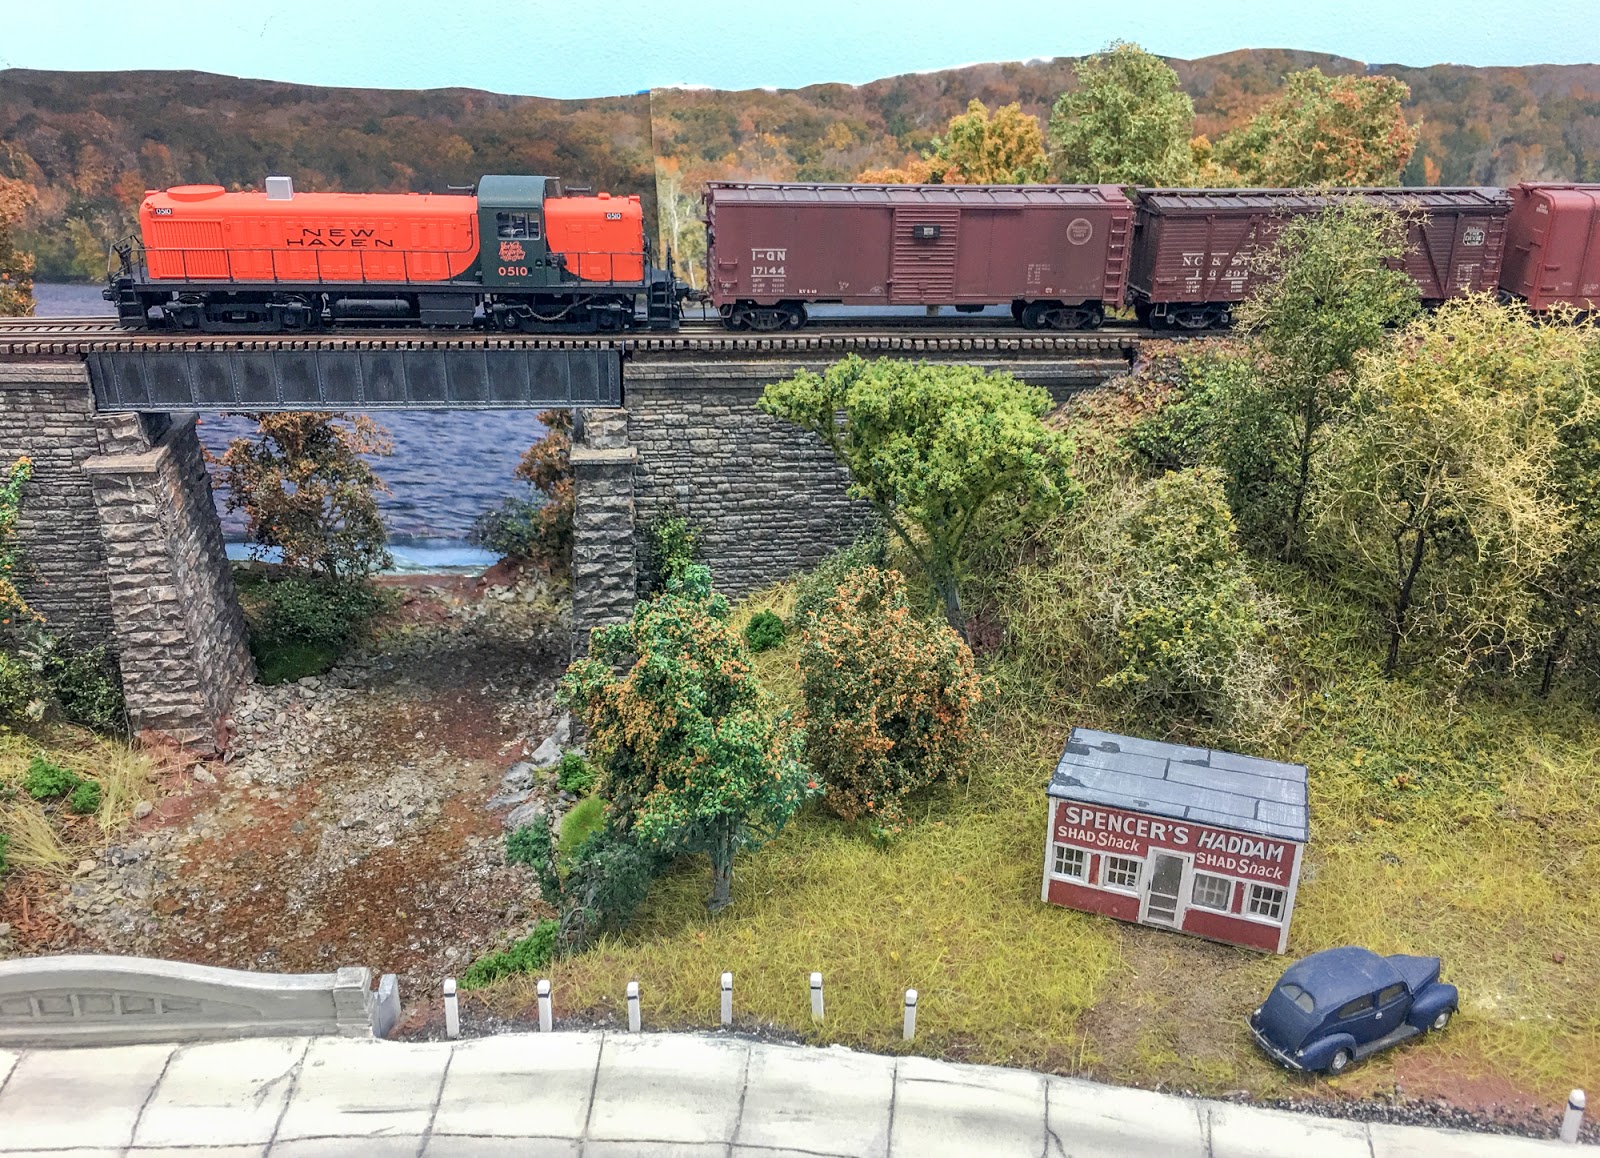 The Ultimate Prototype Picture Railroad Modeling Guide with over 35,000 Photos 